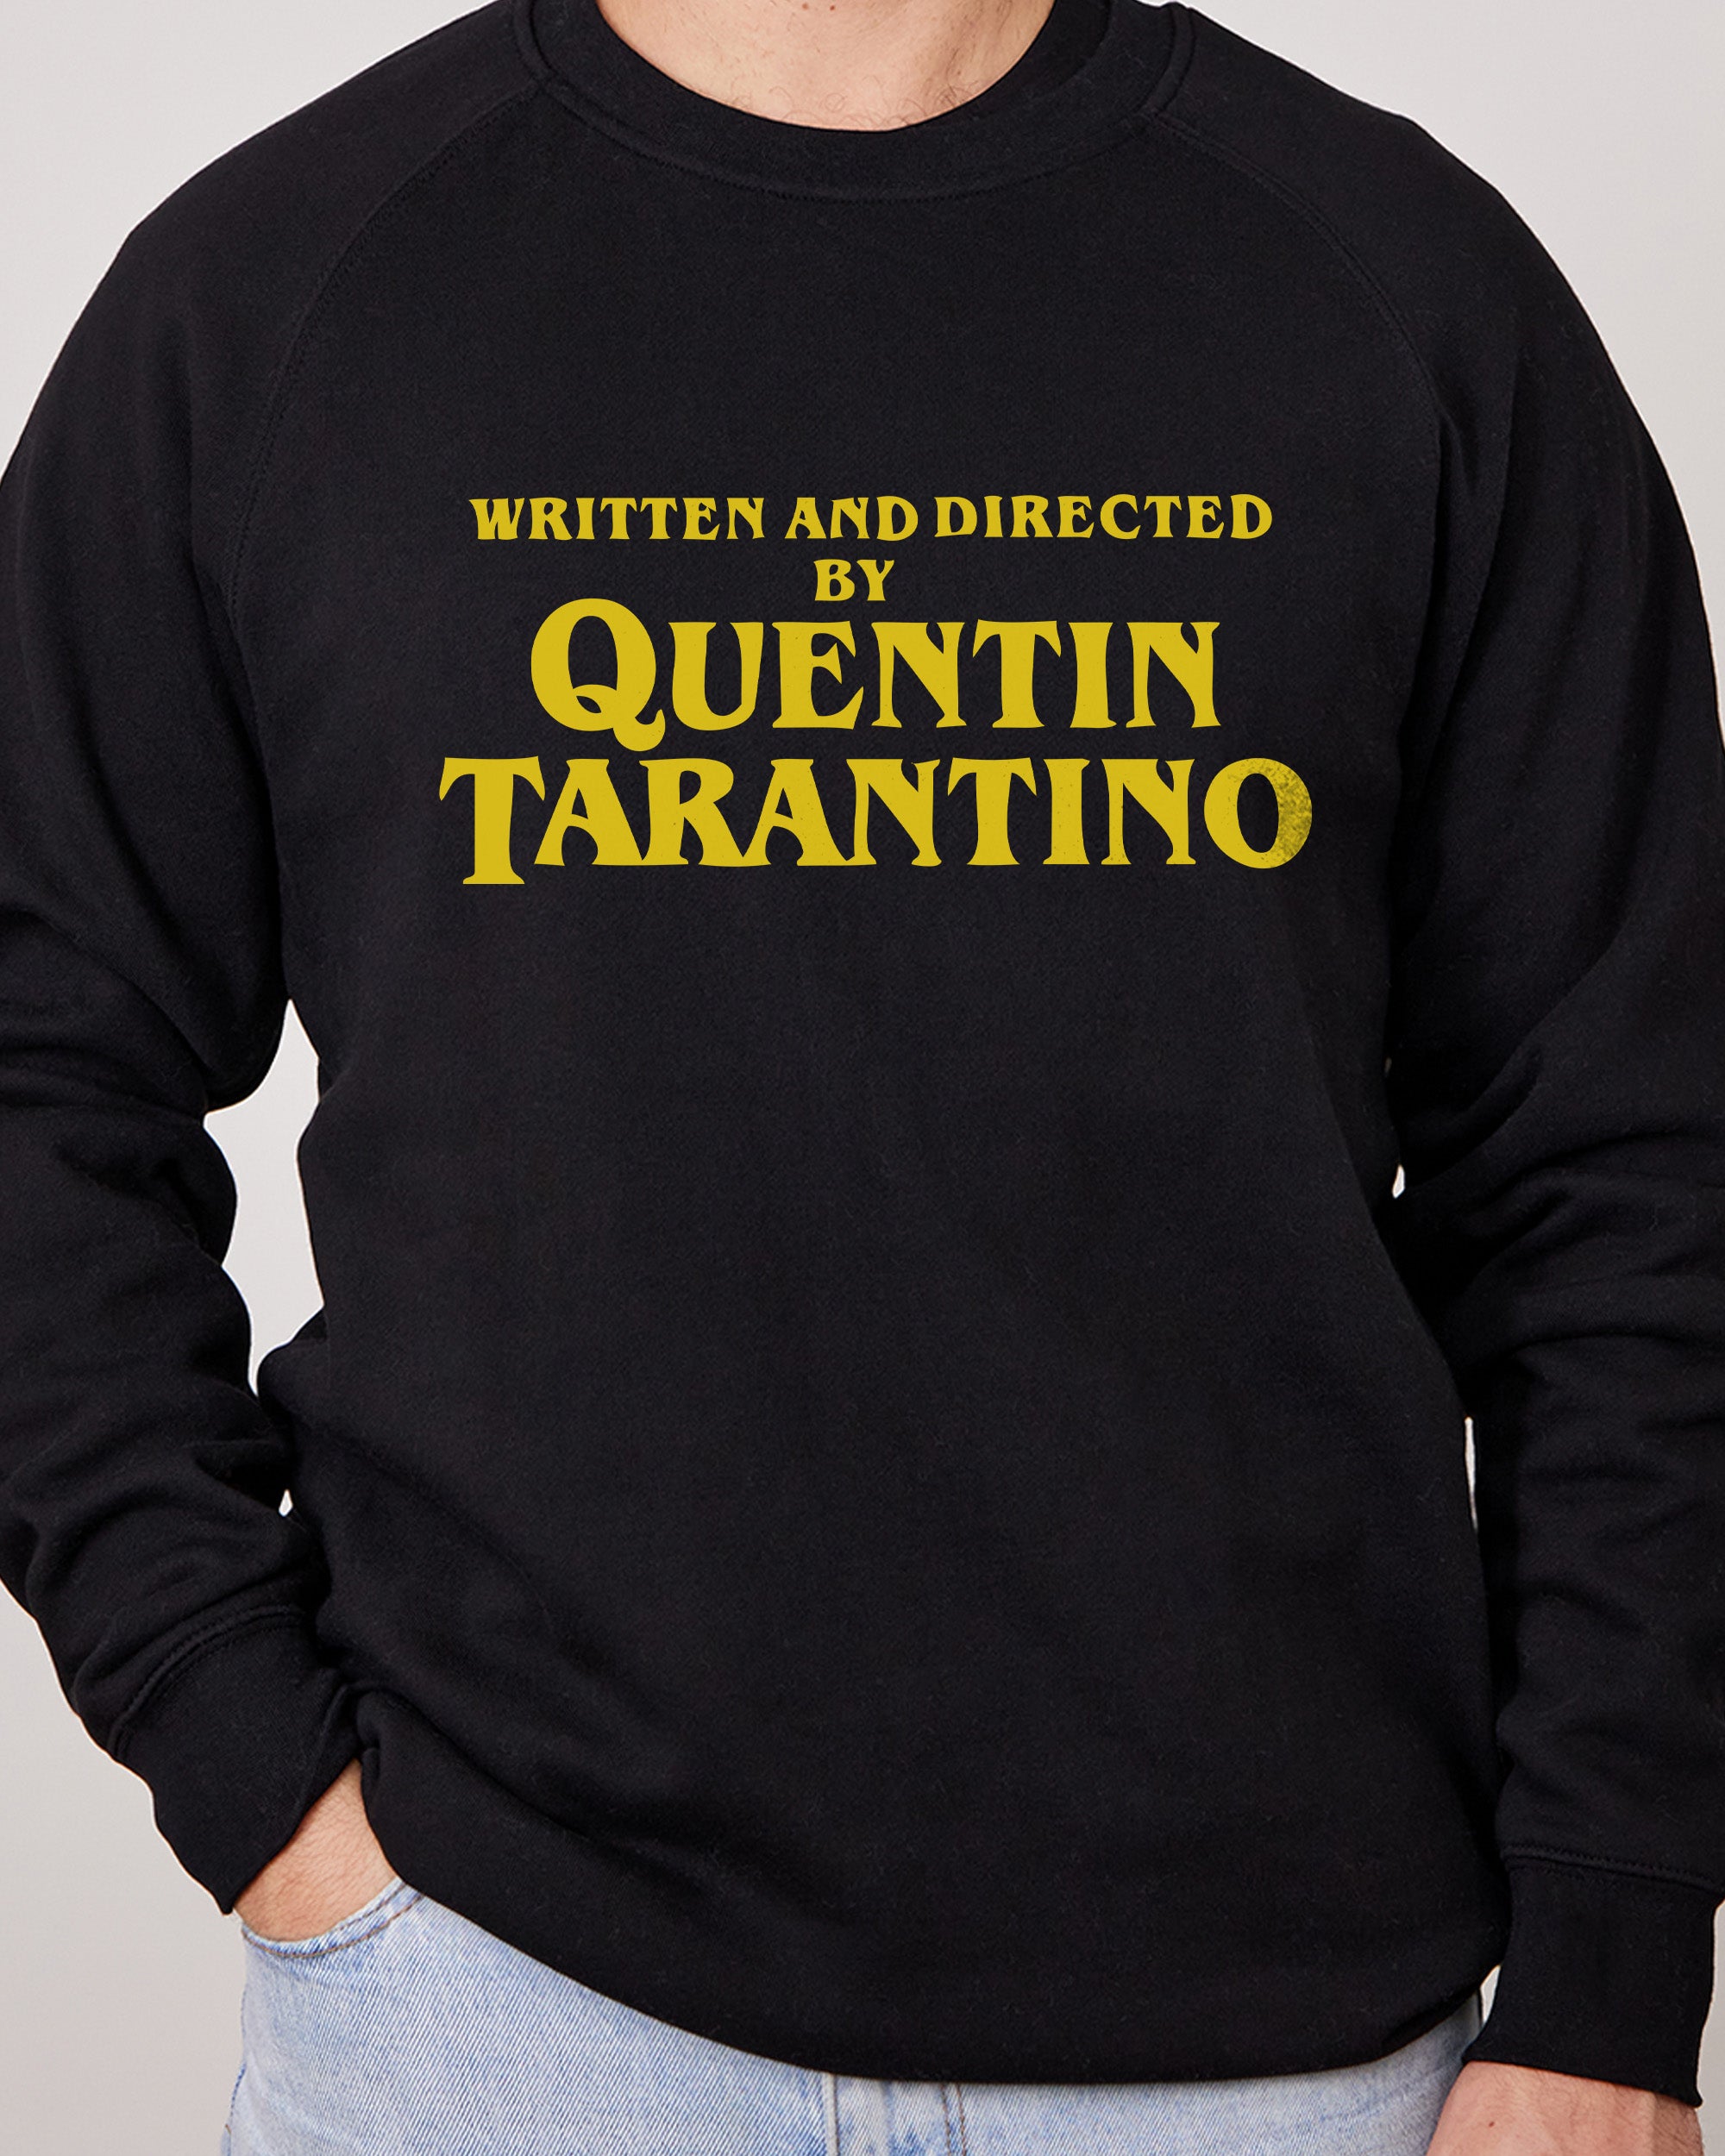 Written and Directed by Quentin Tarantino Jumper